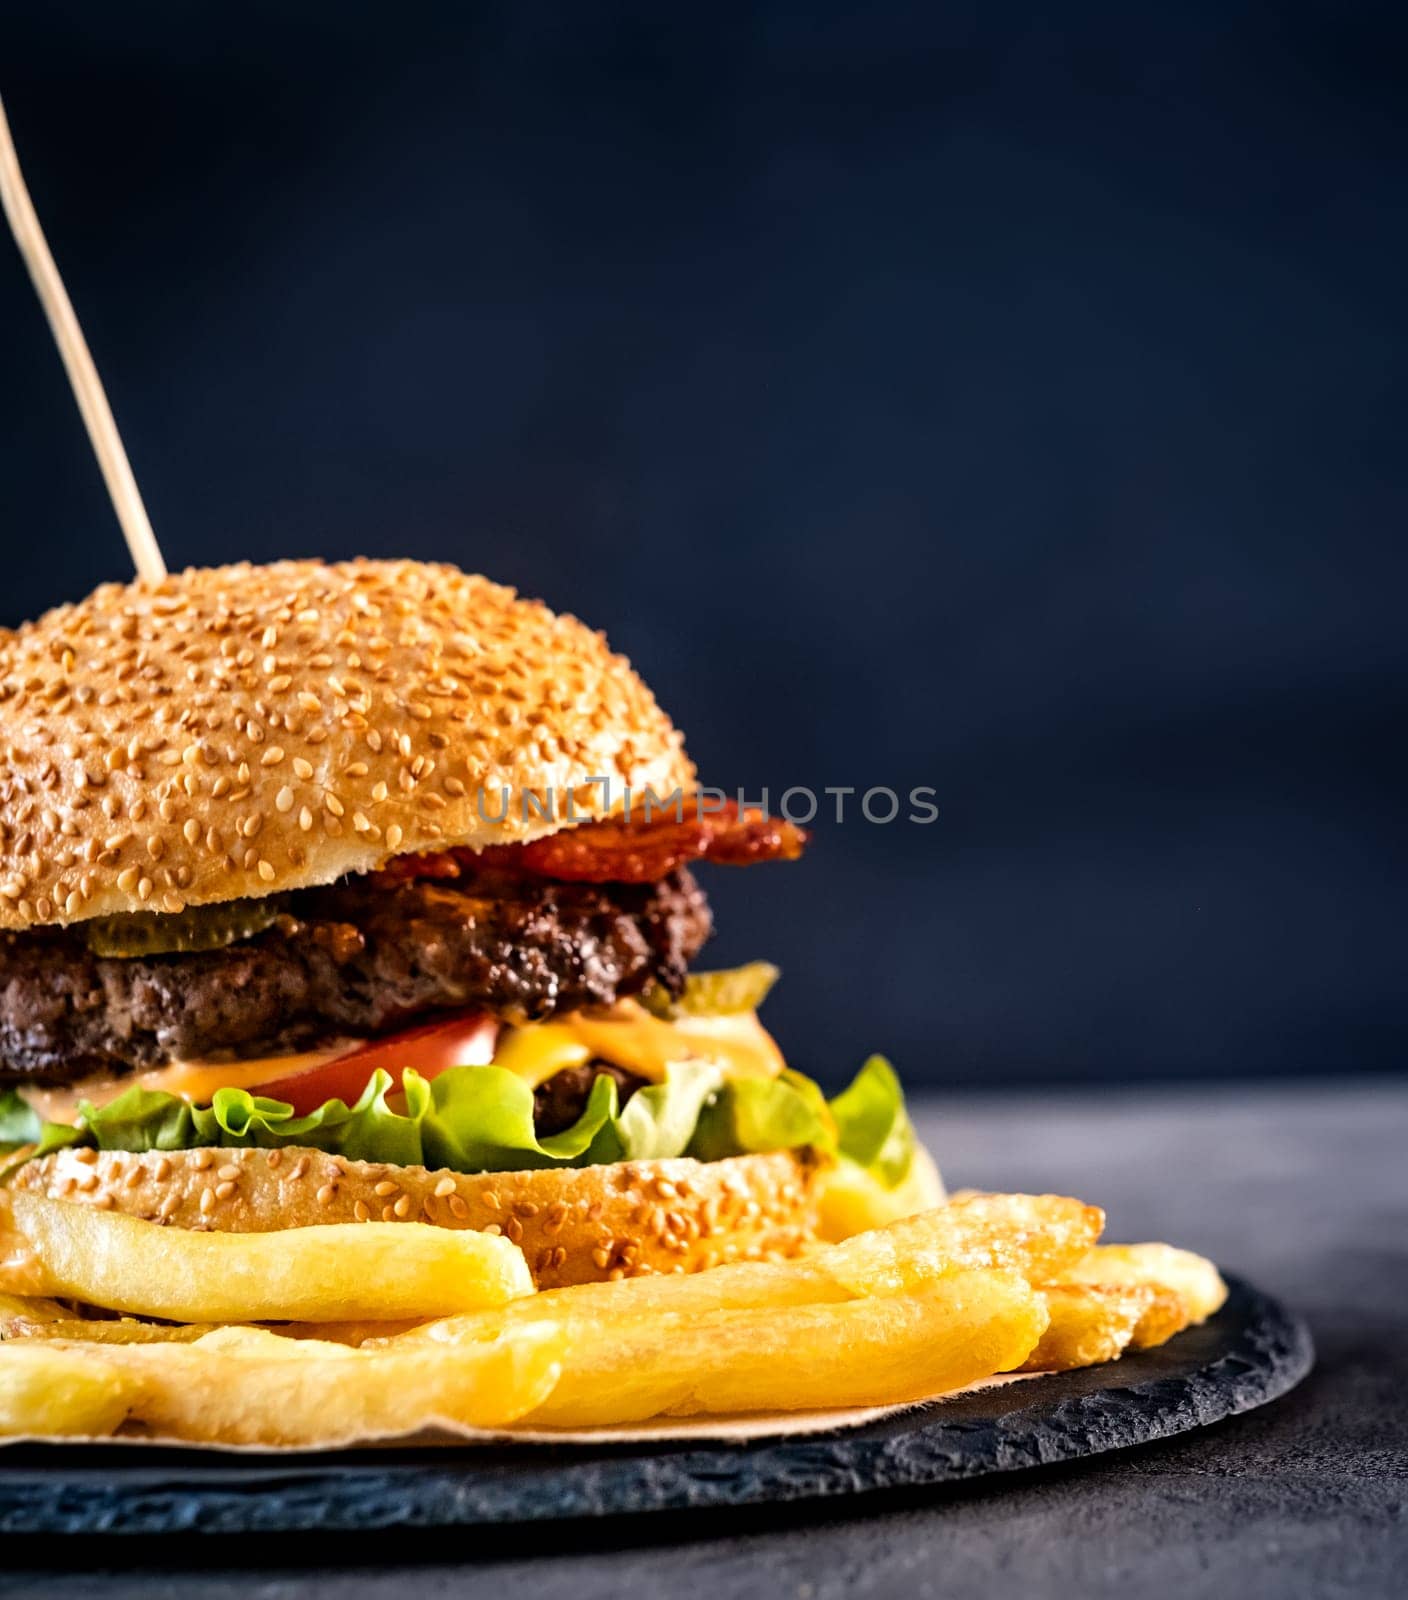 Juicy burger with french fries by GekaSkr